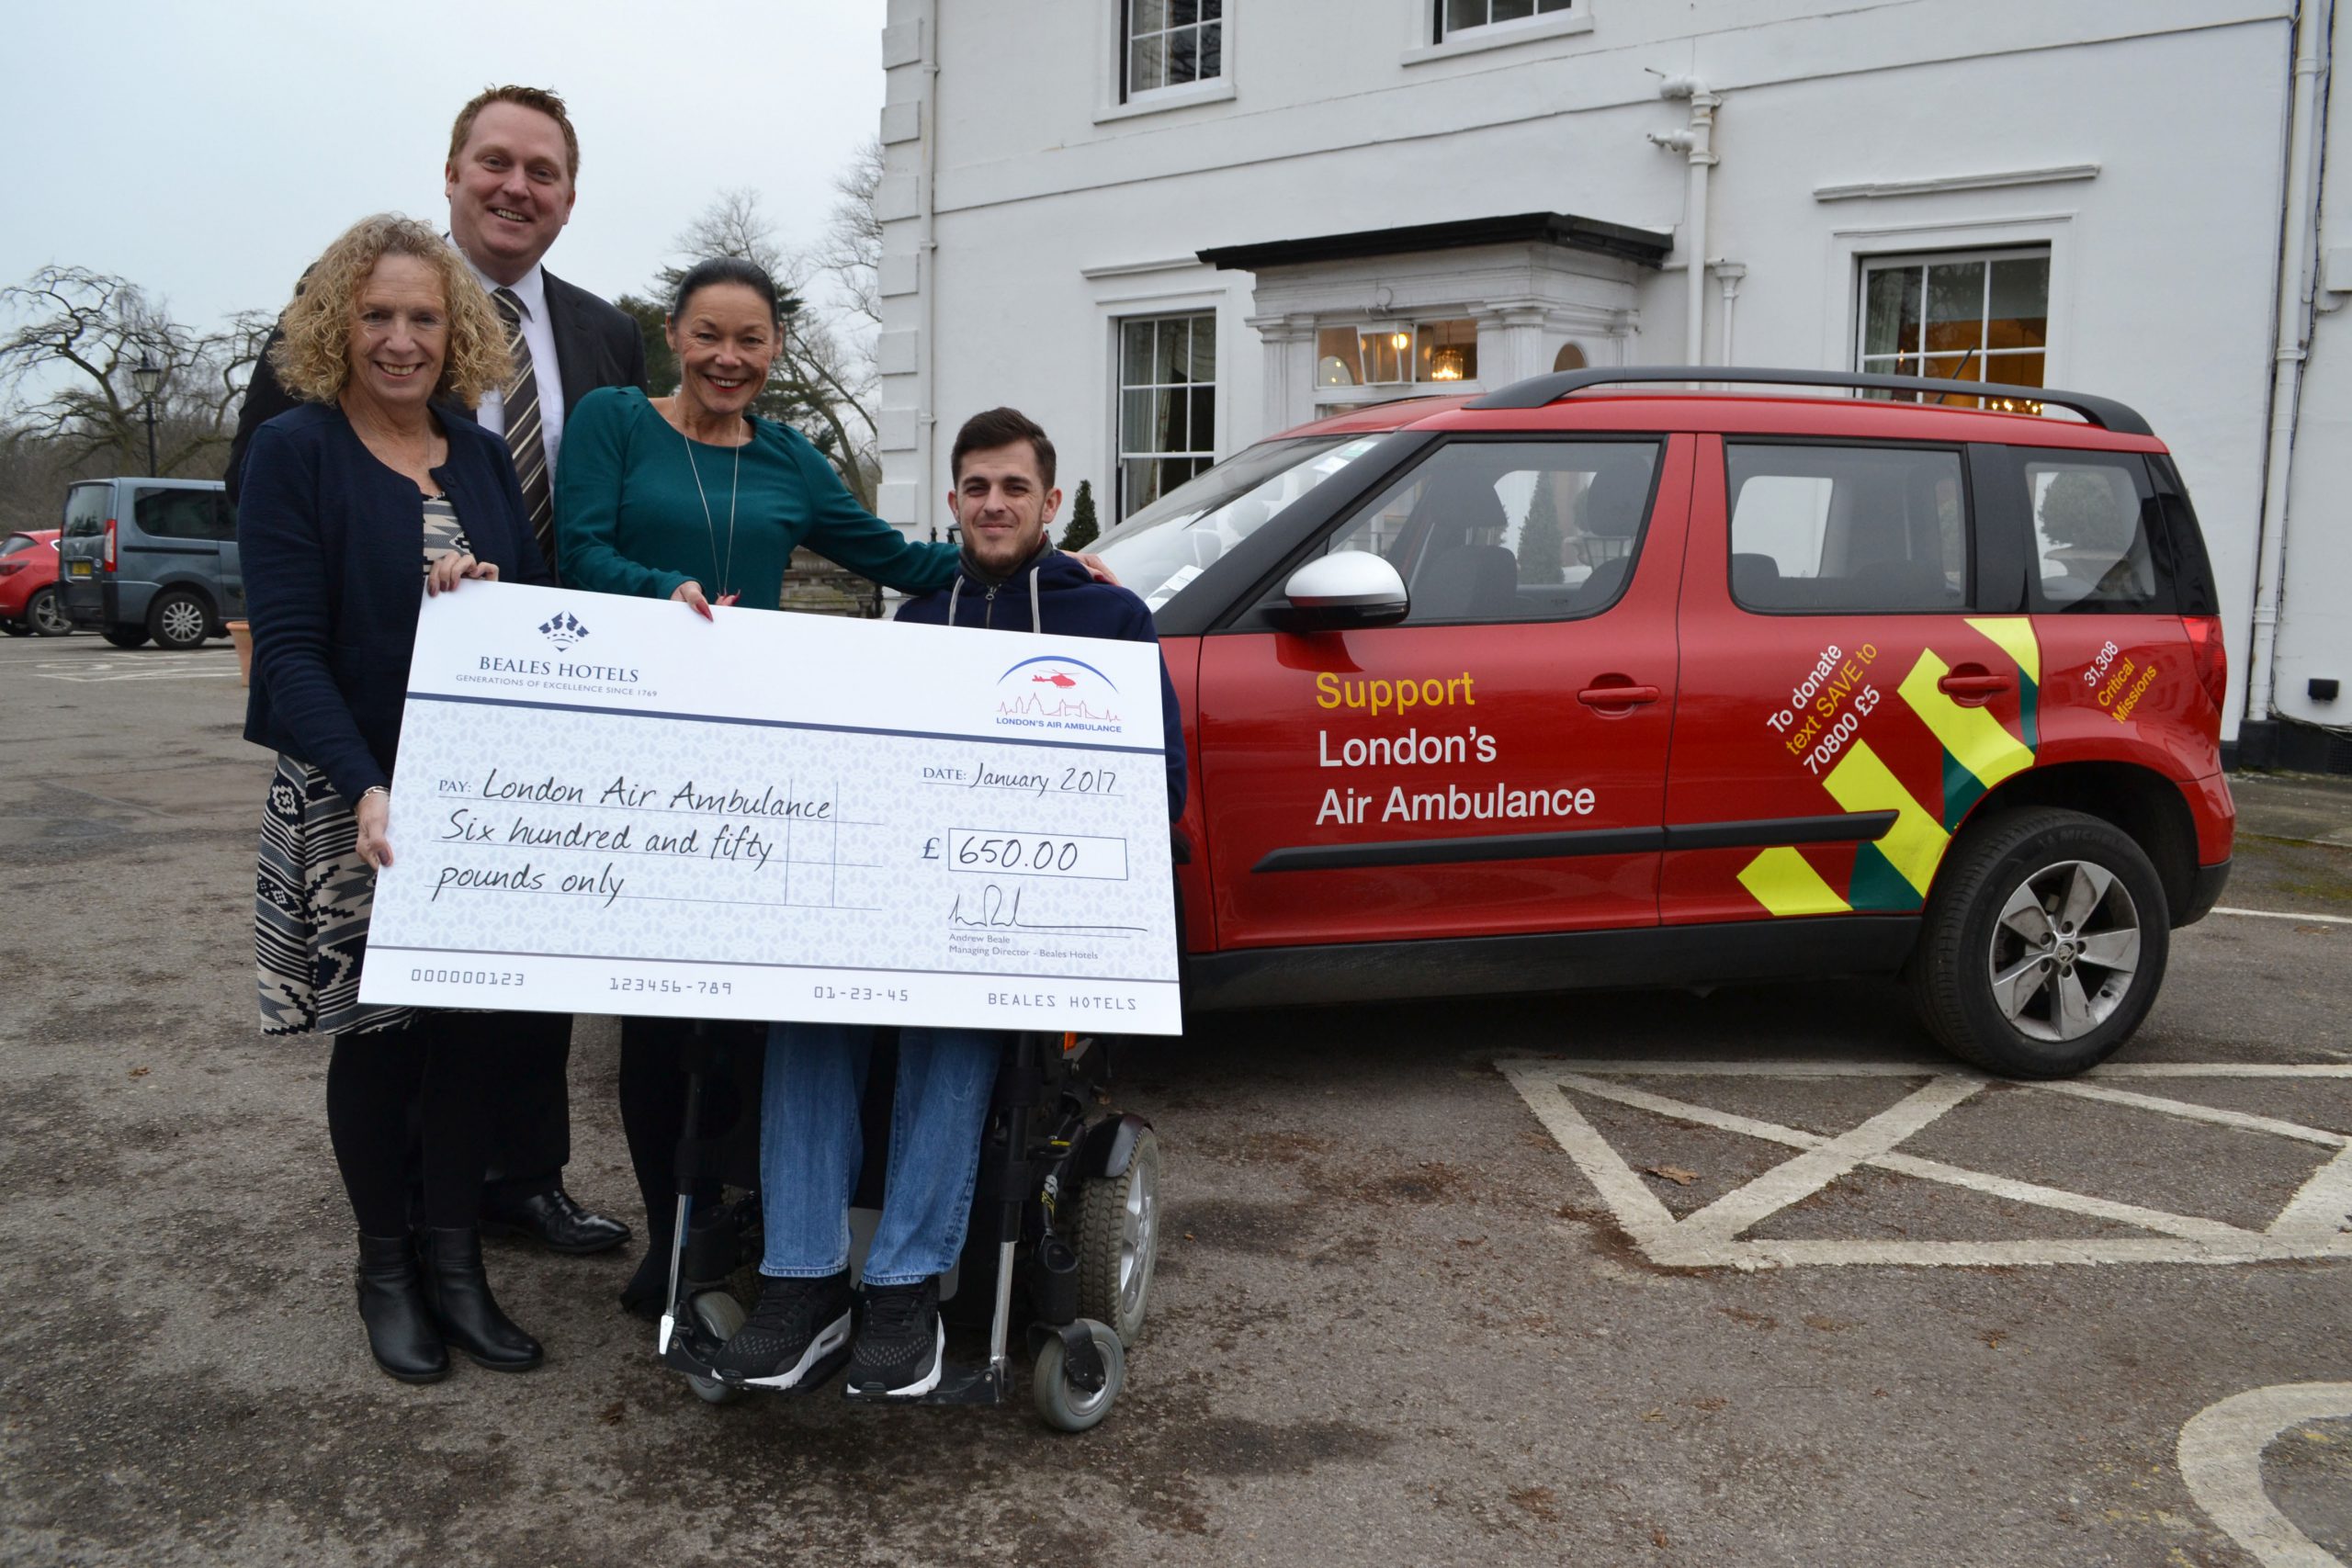 Local Hotel Supports Life Saving Service